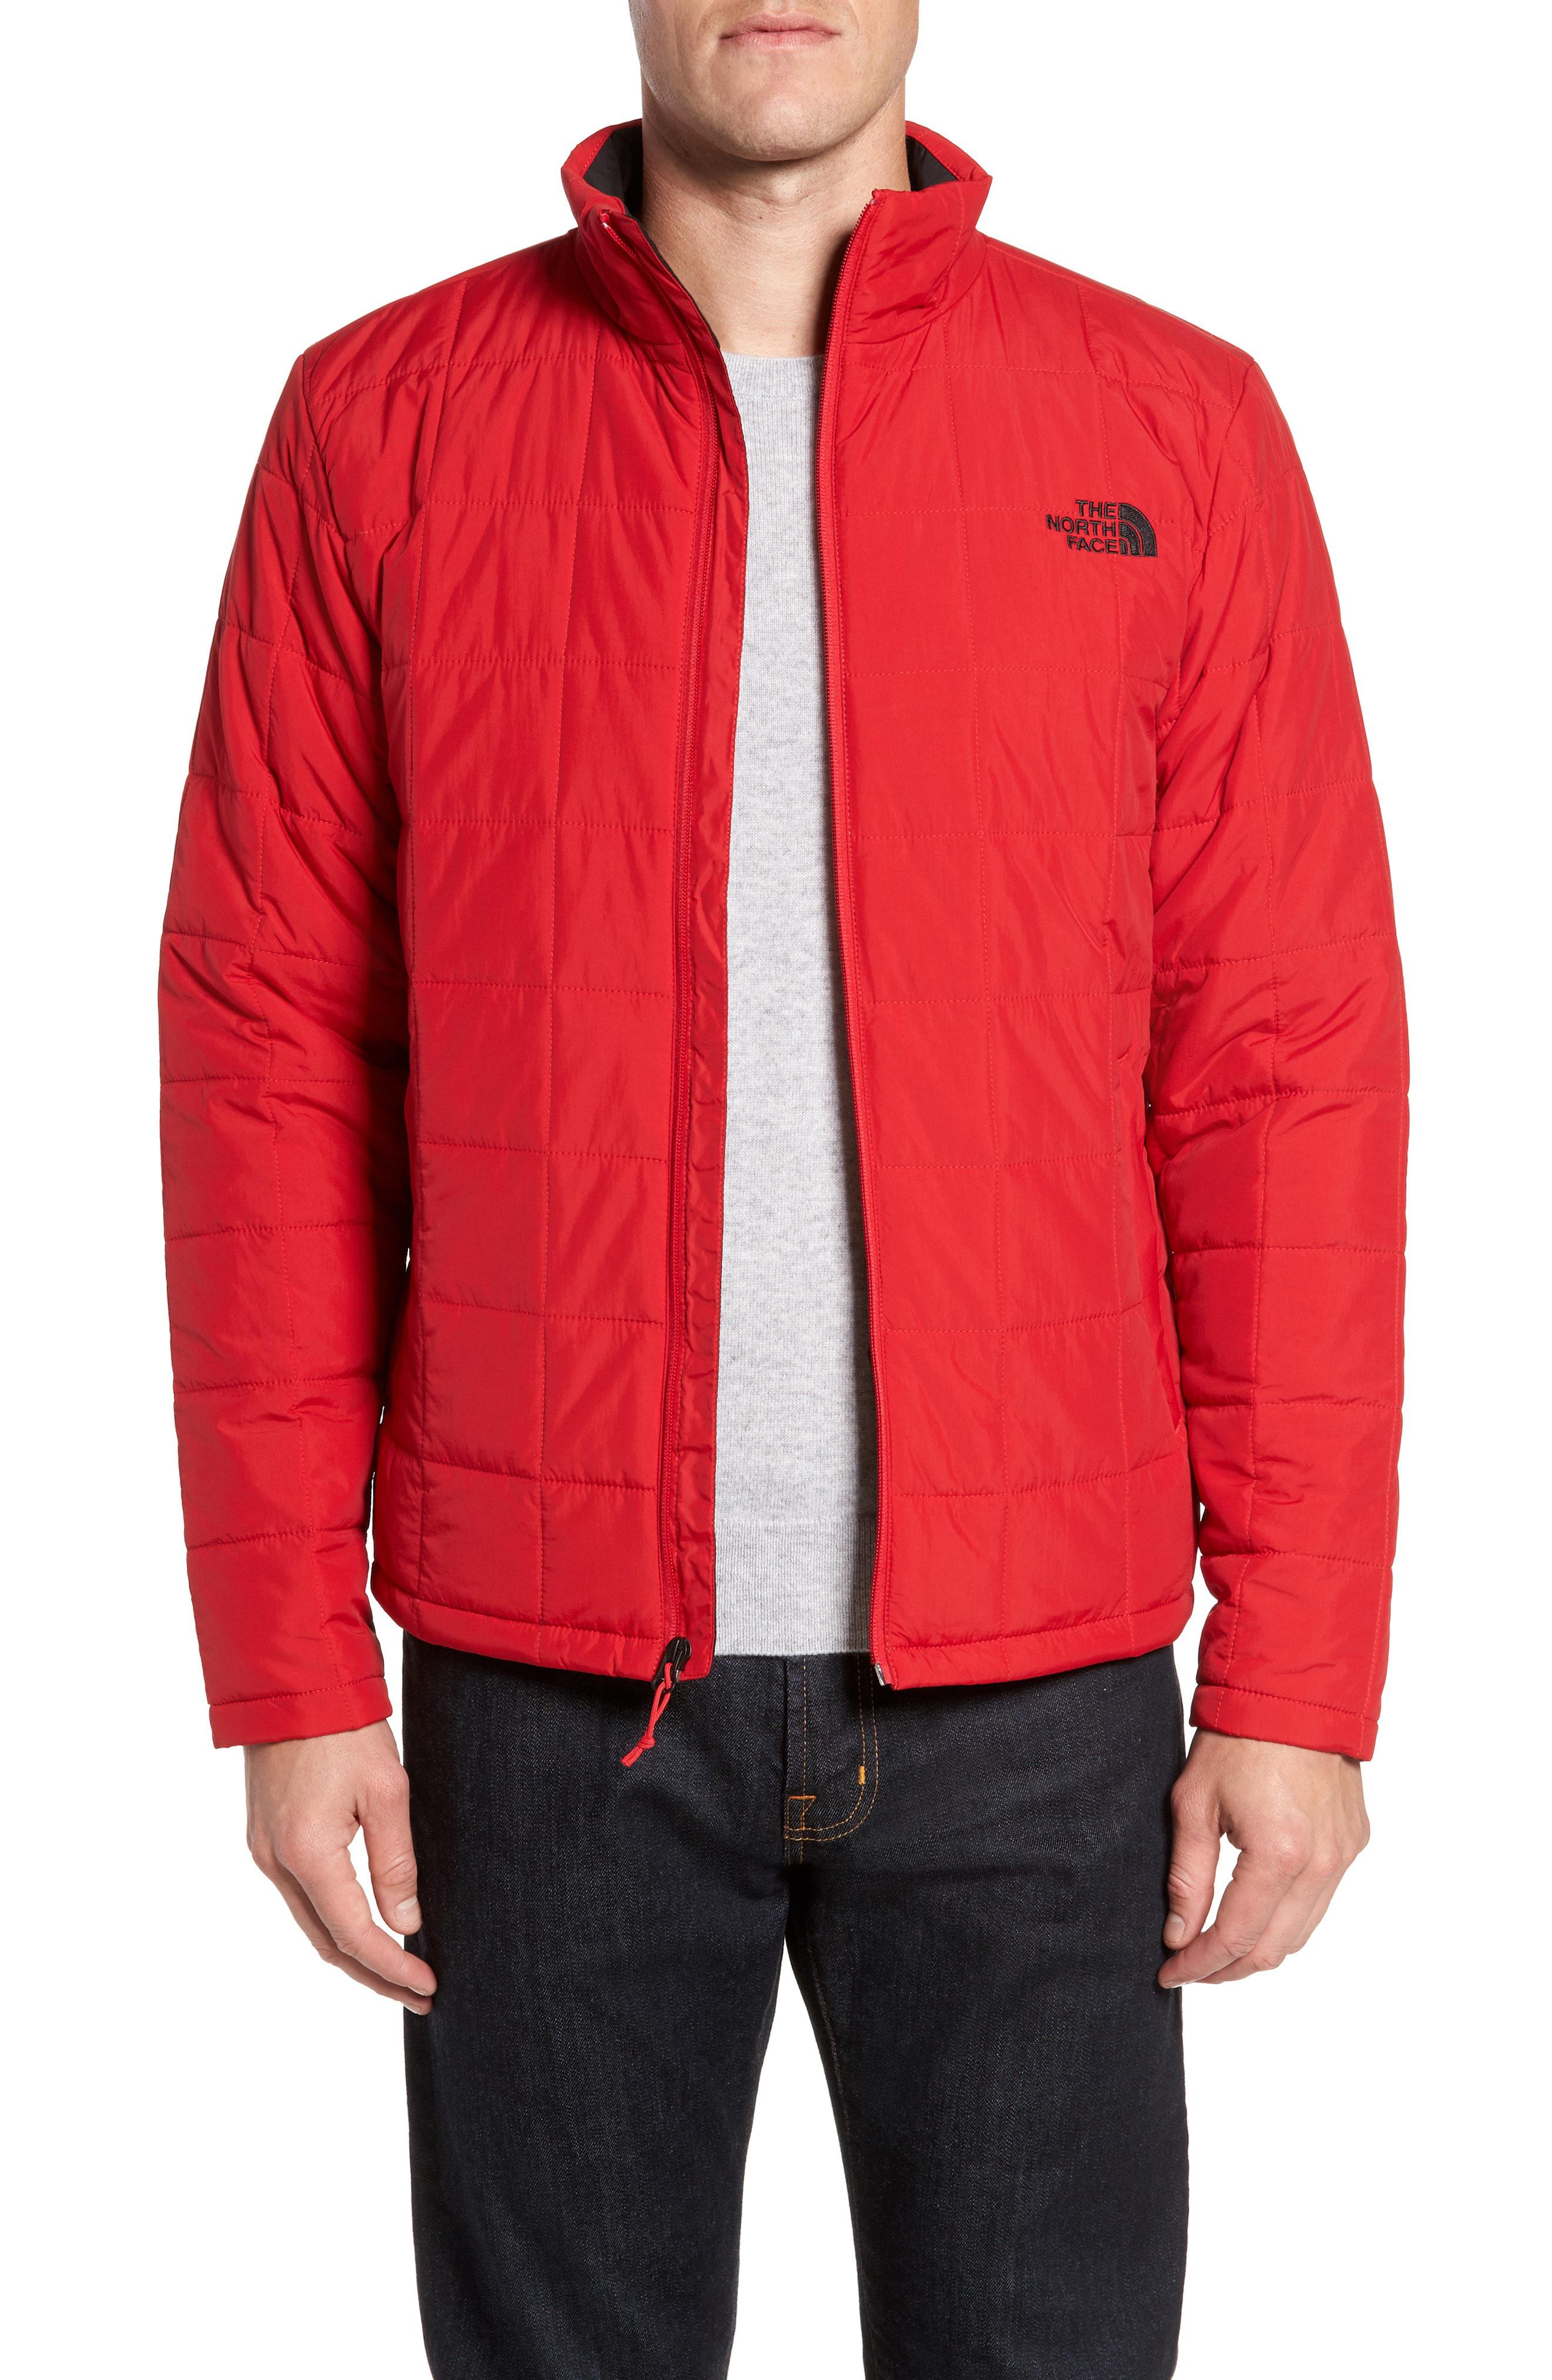 The North Face Harway Heatseaker(tm) Jacket in Red for Men - Lyst